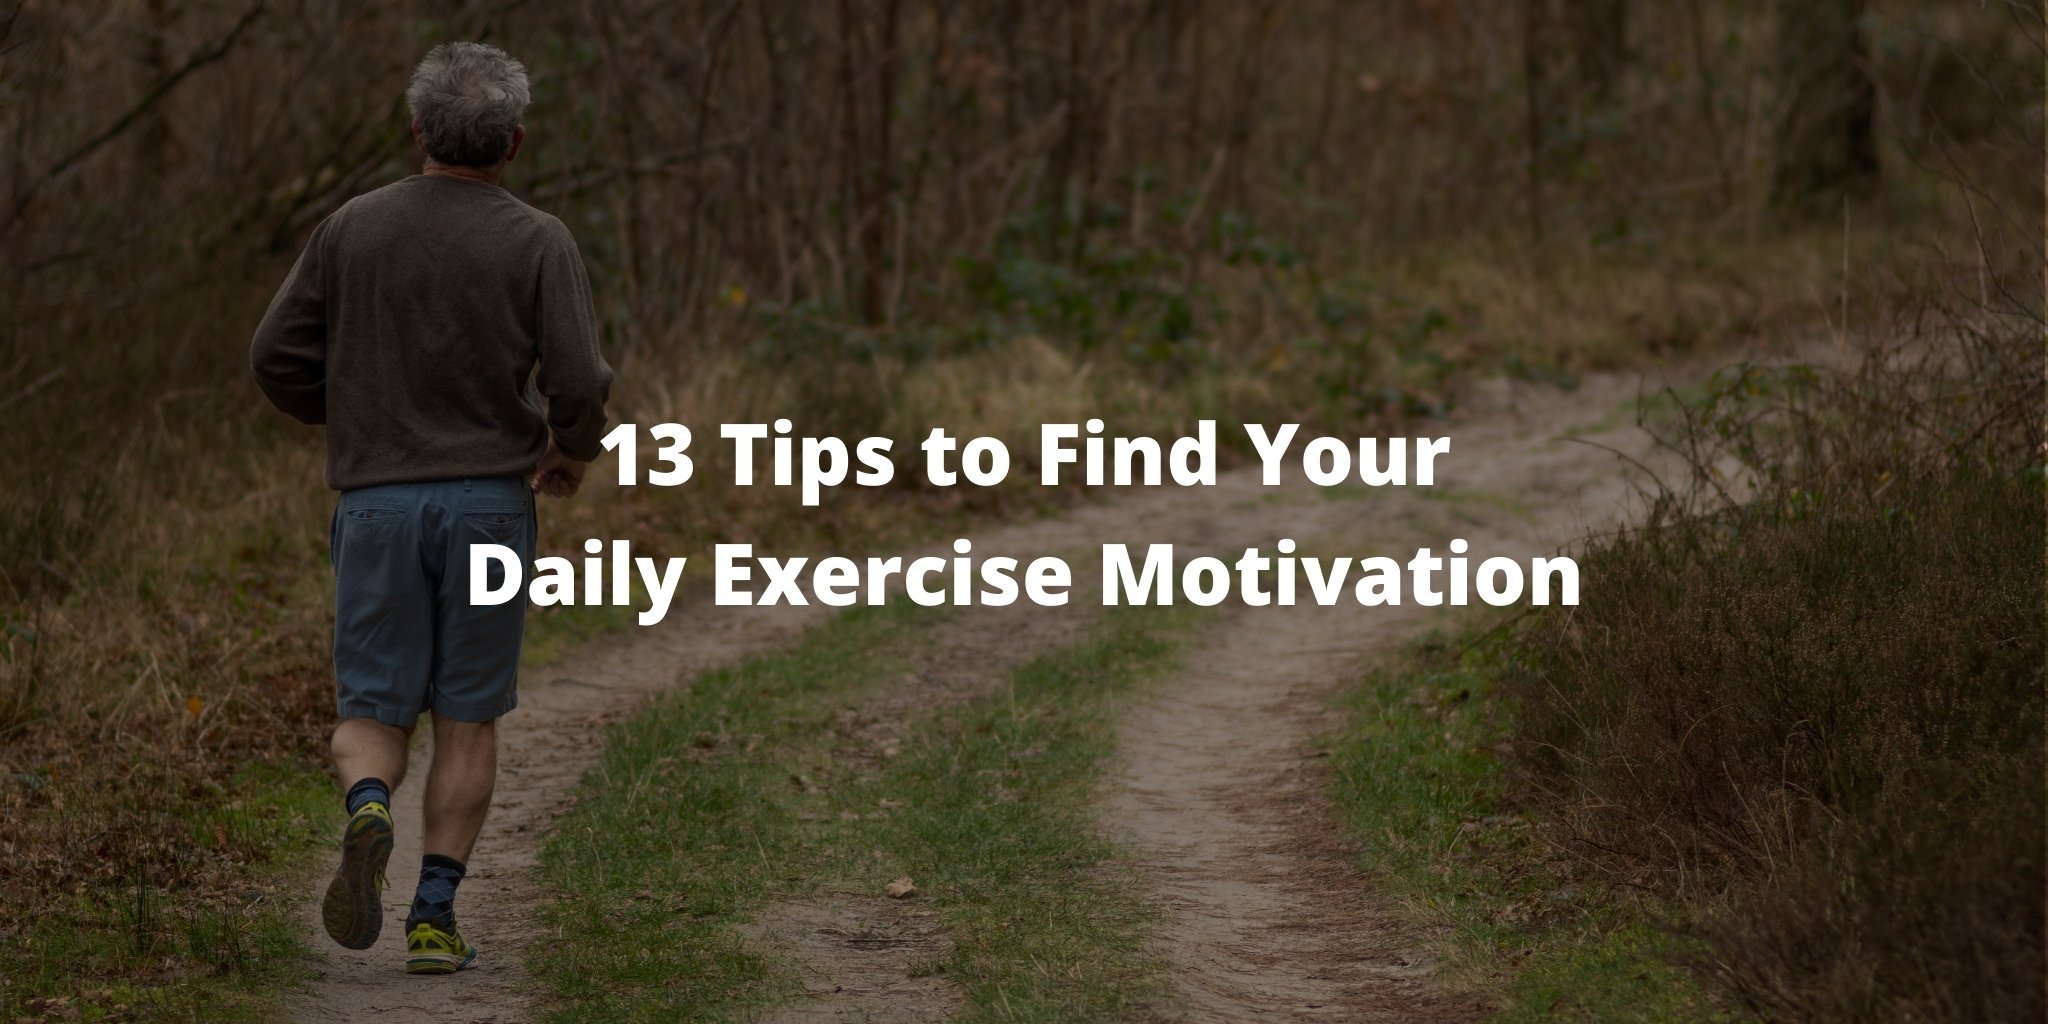 13 Tips to Find Your Daily Exercise Motivation